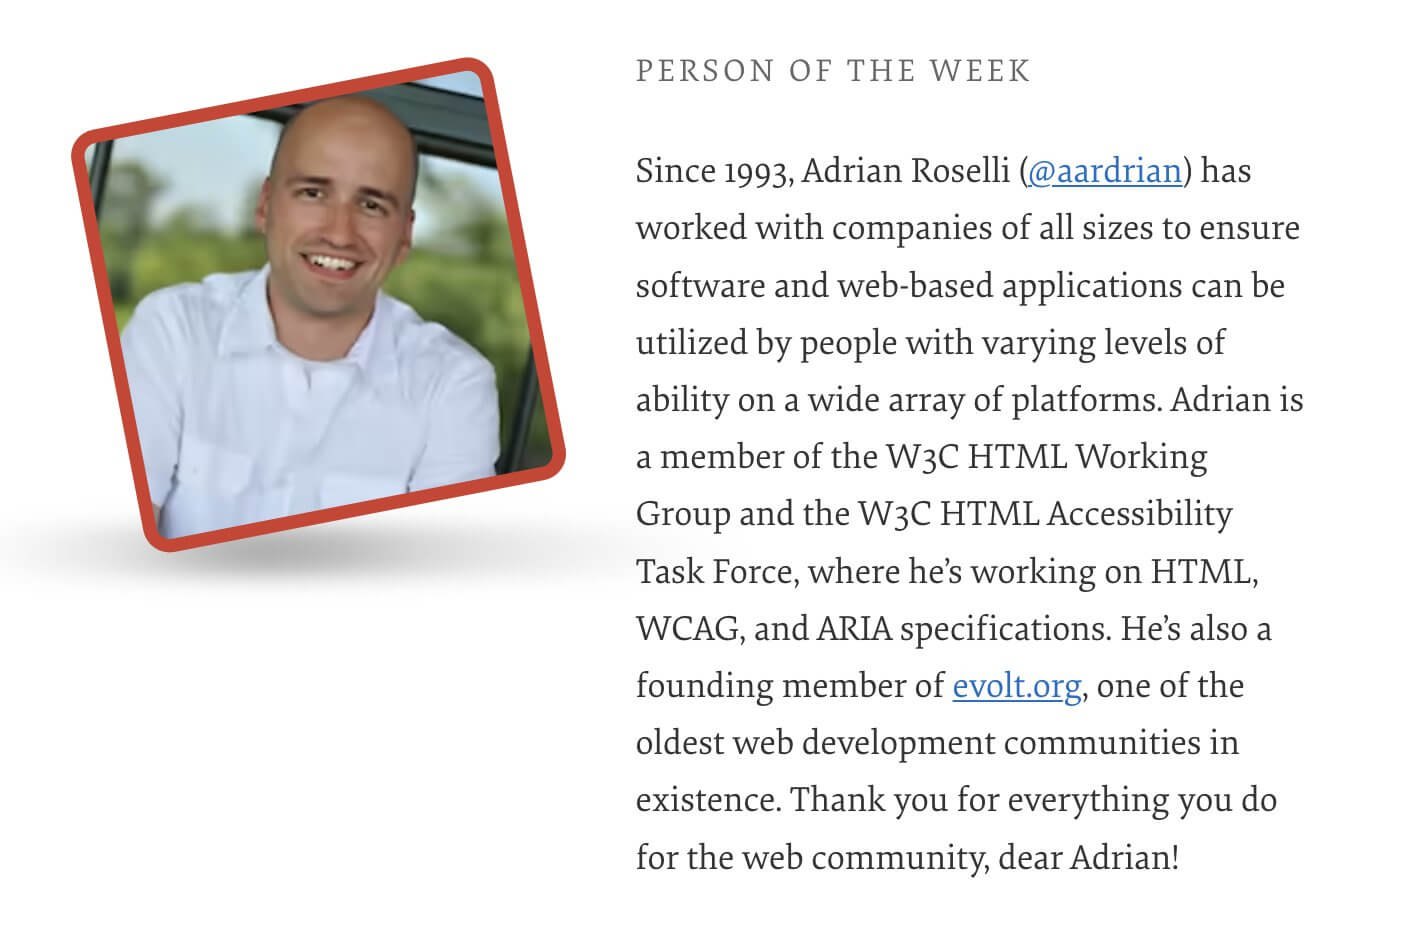 Person of the Week. Since 1993, Adrian Roselli (@aardrian) has worked with companies of all sizes to ensure software and web-based applications can be utilized by people with varying levels of ability on a wide array of platforms. Adrian is a member of the W3C HTML Working Group and the W3C HTML Accessibility Task Force, where he's working on HTML, WCAG, and ARIA specifications. He's also a founding member of evolt.org, one of the oldest web development communities in existence. Thank you for everything you do for the web community, dear Adrian!